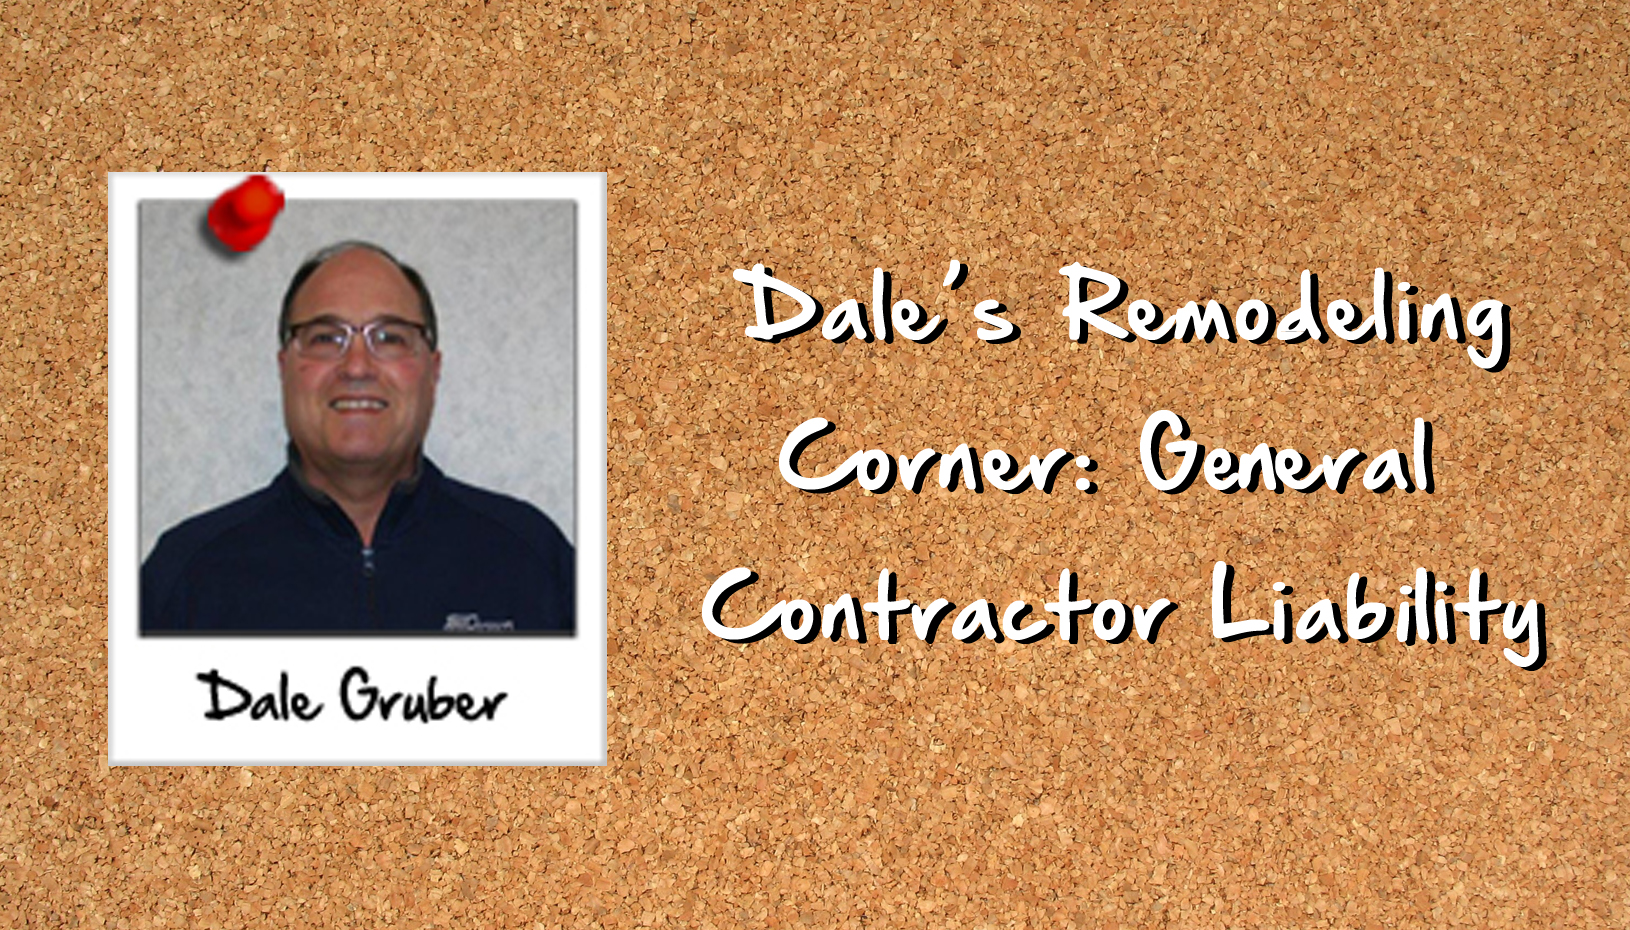 General Contractor Liability